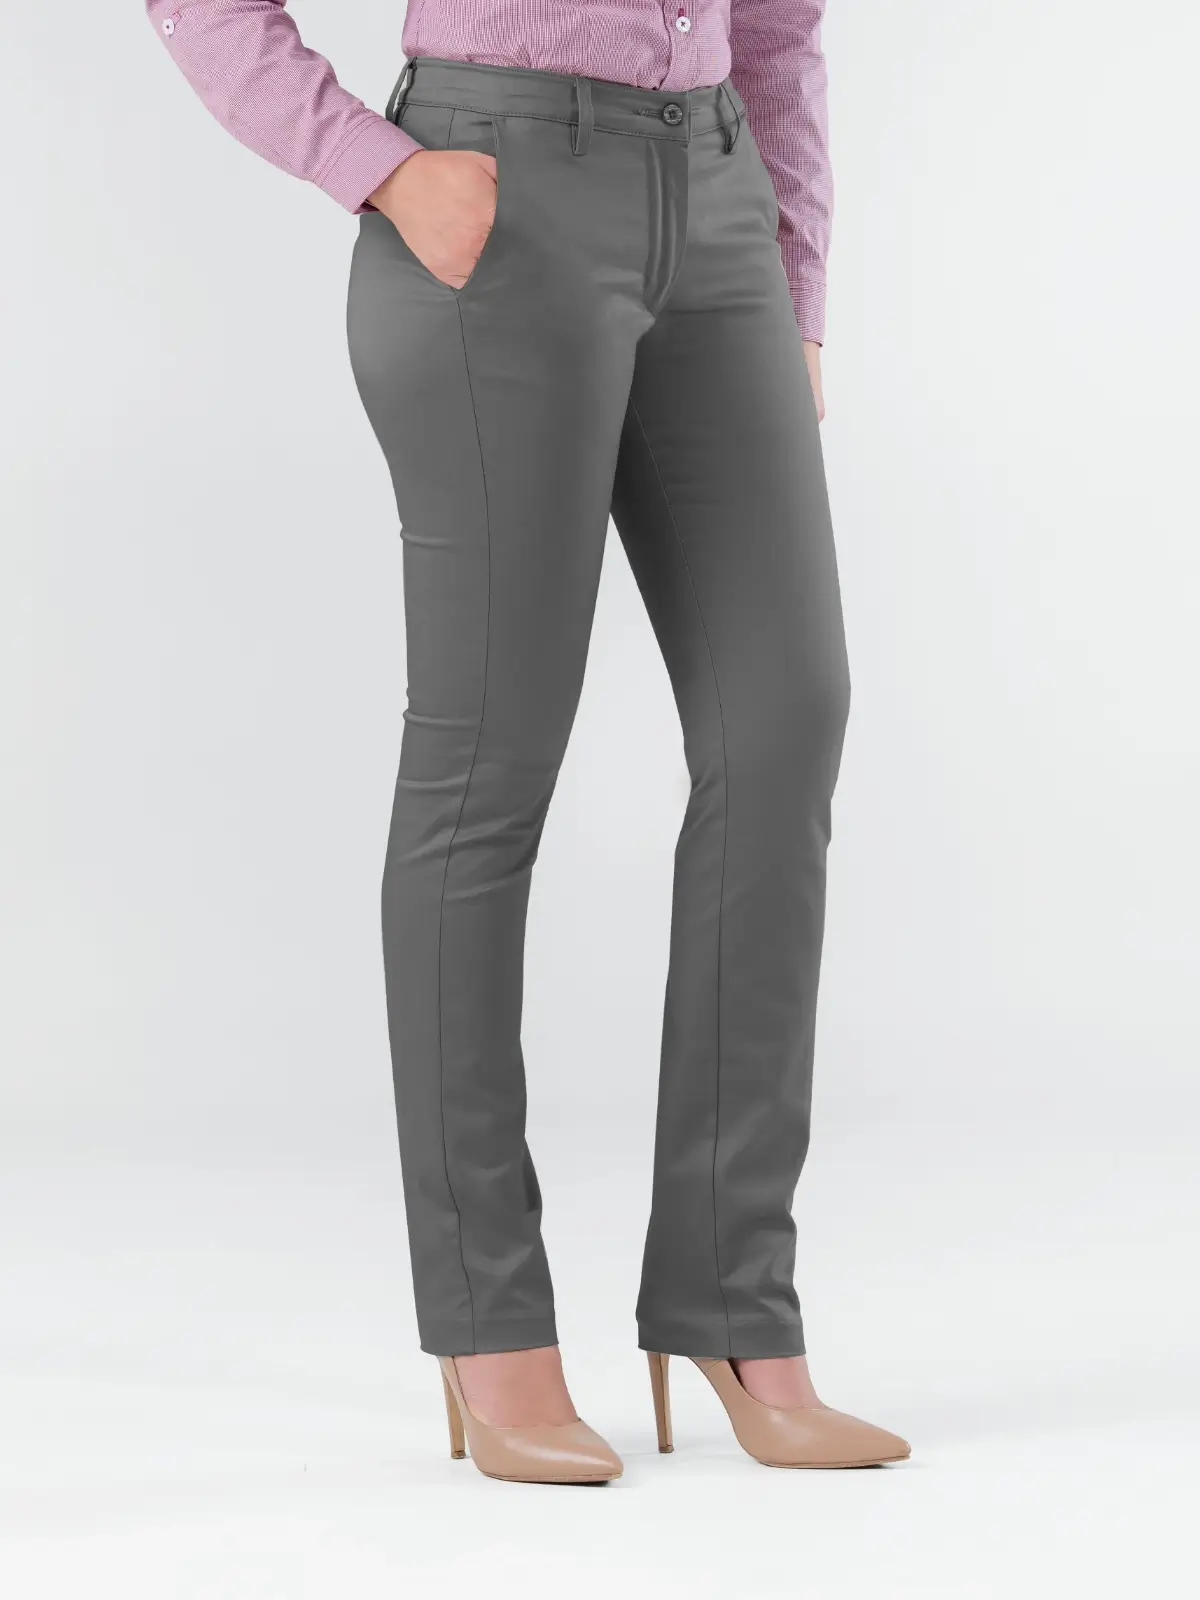 Gray executive pants for women front view